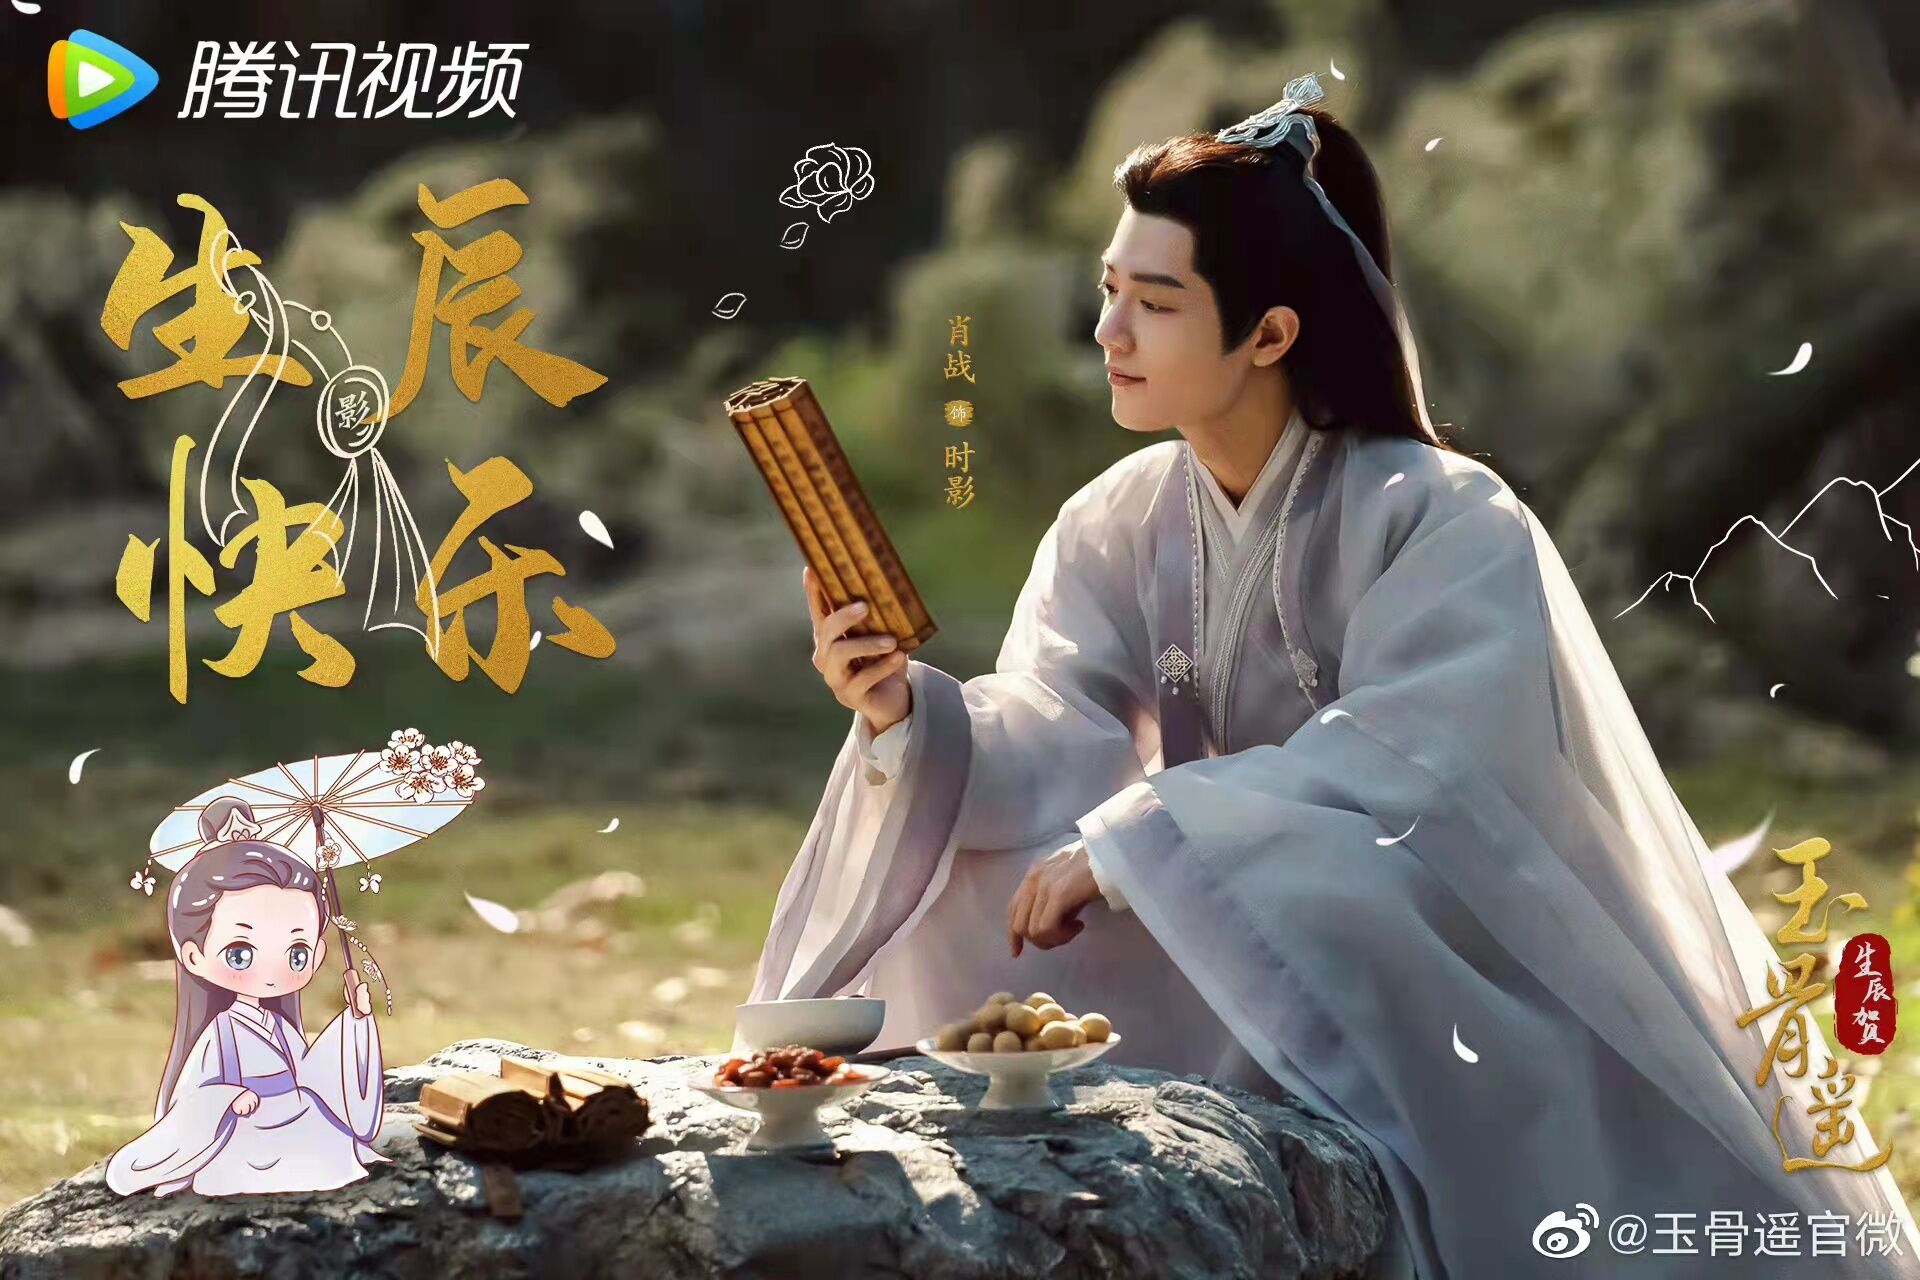 The Longest Promise with Xiao Zhan